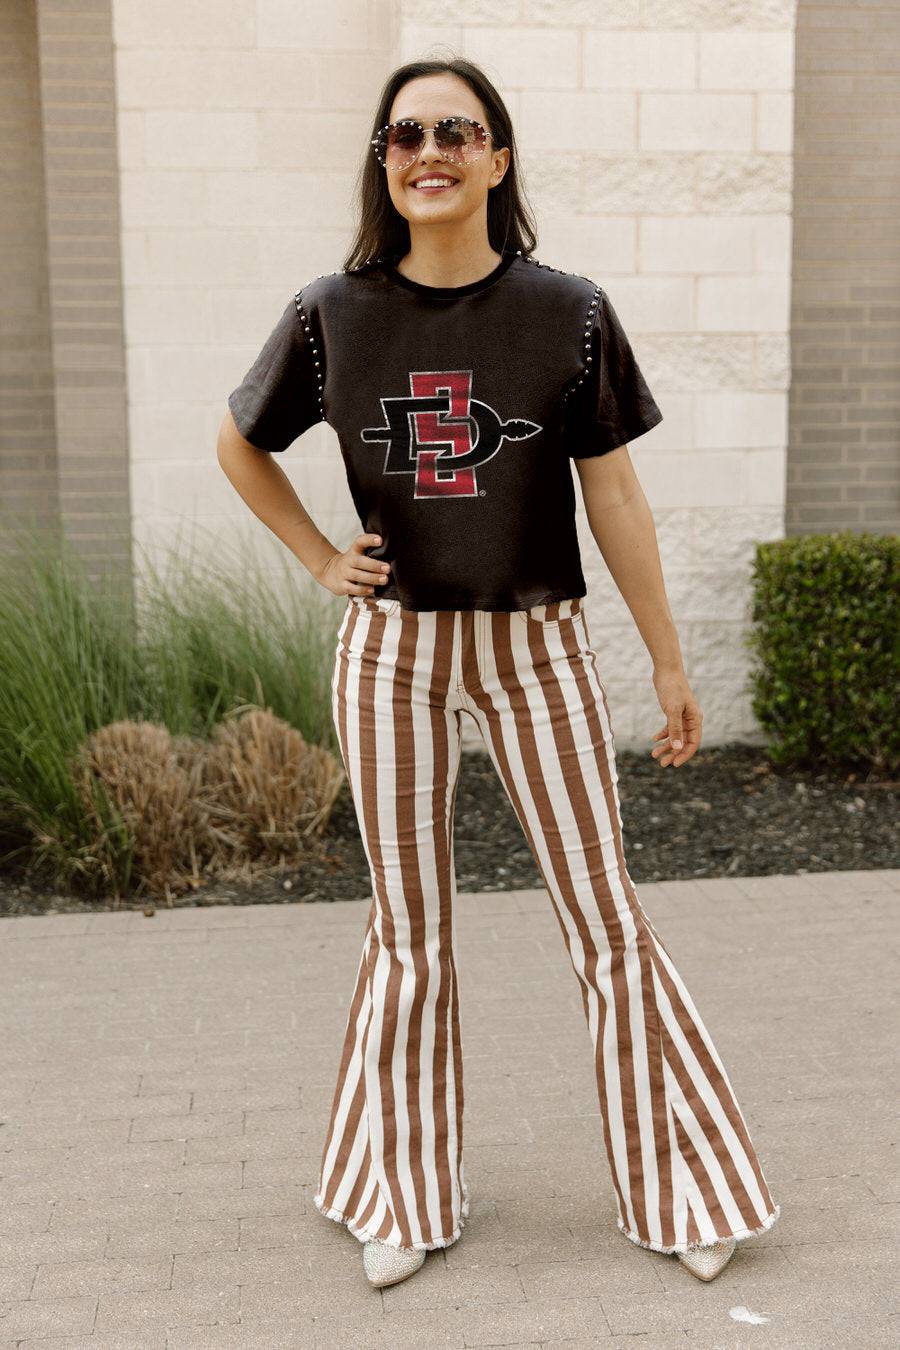 San Diego State Aztecs cross country gear